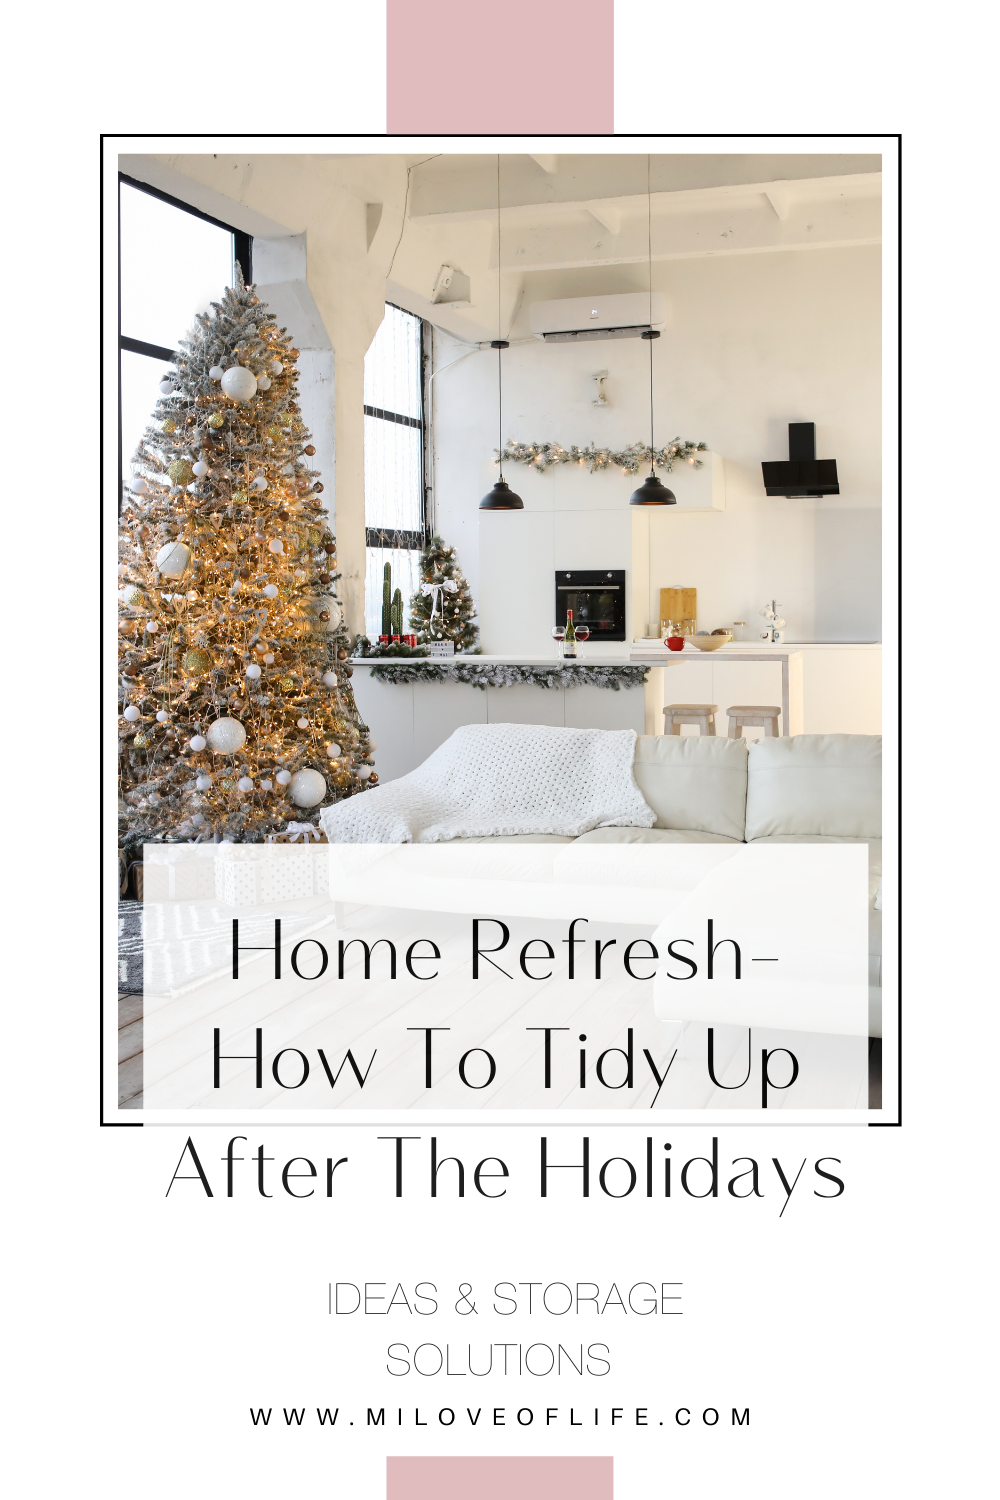 Home Refresh- How To Tidy Up After The Holidays